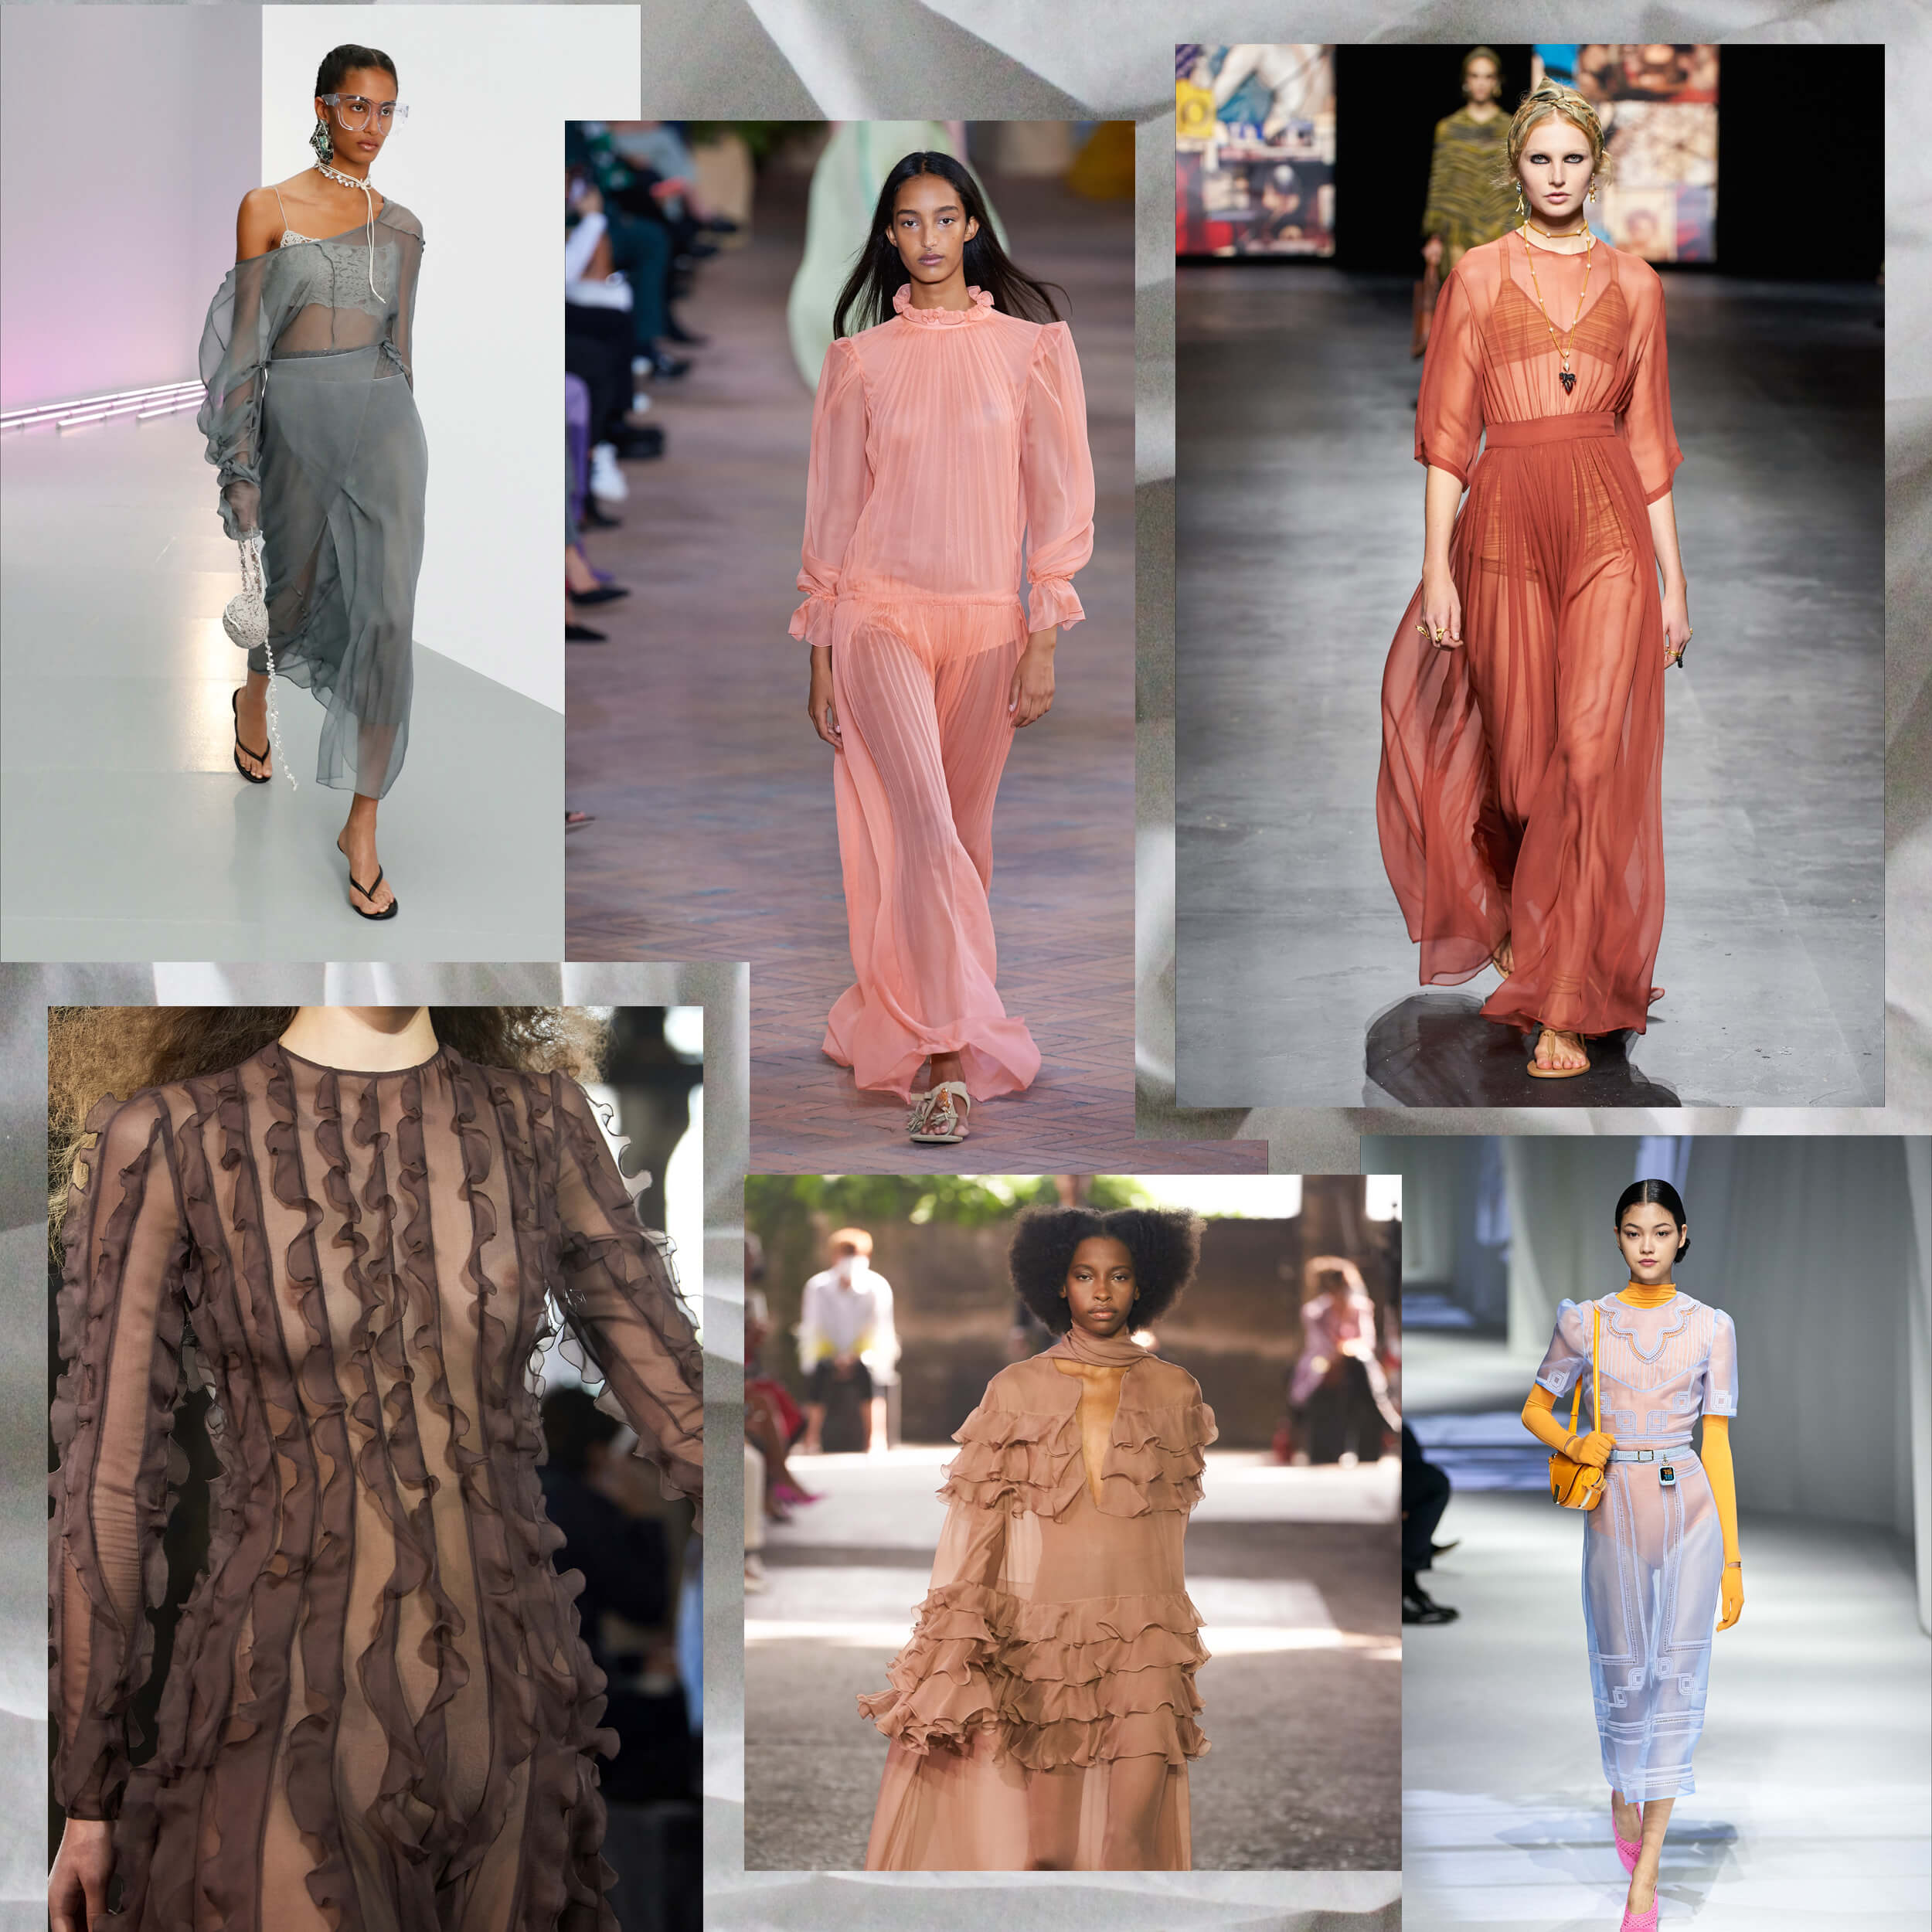 10 Trends For The Spring Summer 2021 The Italian Reve There have been complaints about the spring 2021 collections. 10 trends for the spring summer 2021